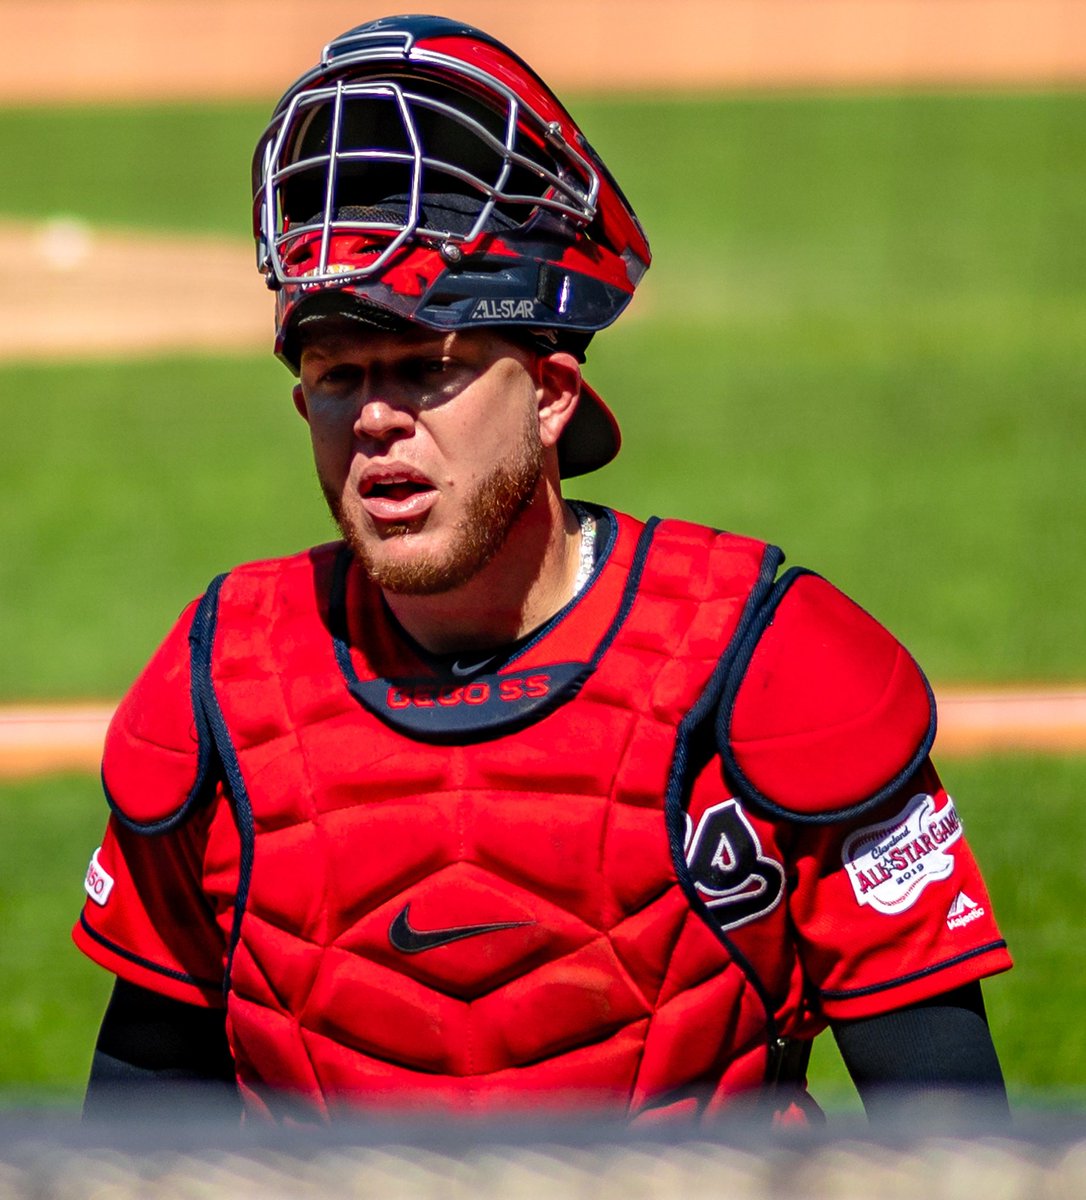 Lastly, here are some current catchers you gotta know:- JT Realmuto (Philadelphia Phillies)- Yasmani Grandal (Chicago White Sox)- Willson Contreras (Chicago Cubs)- Roberto Pérez (Cleveland Indians) #BaseballTerms101